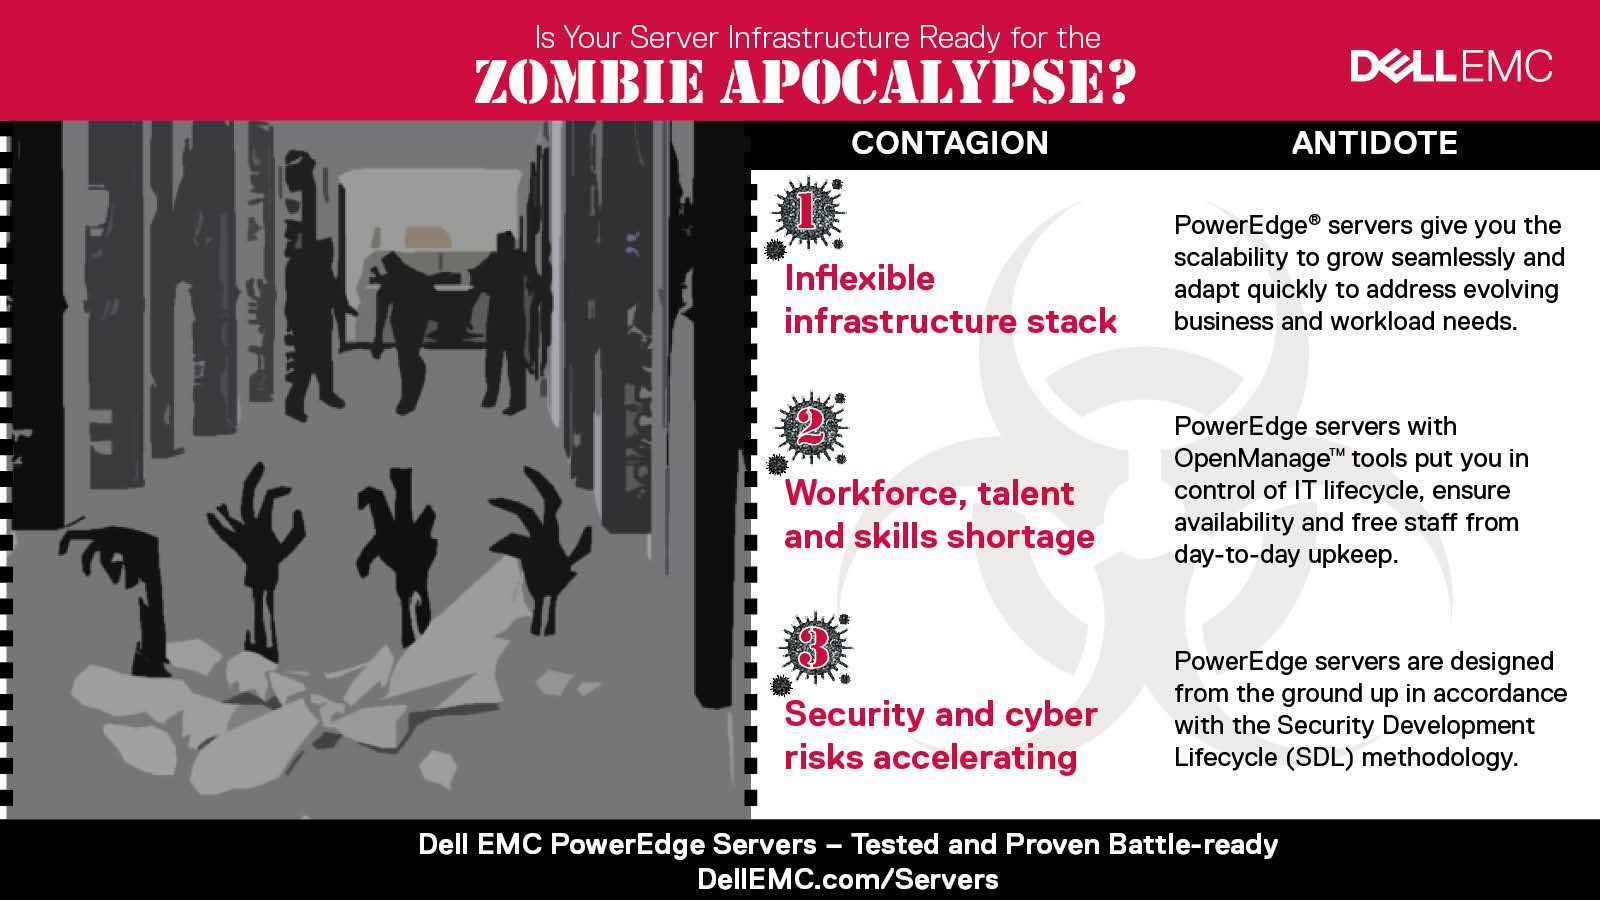 Infographic: Dell EMC PowerEdge Servers - Tested and Proven Battle-Ready